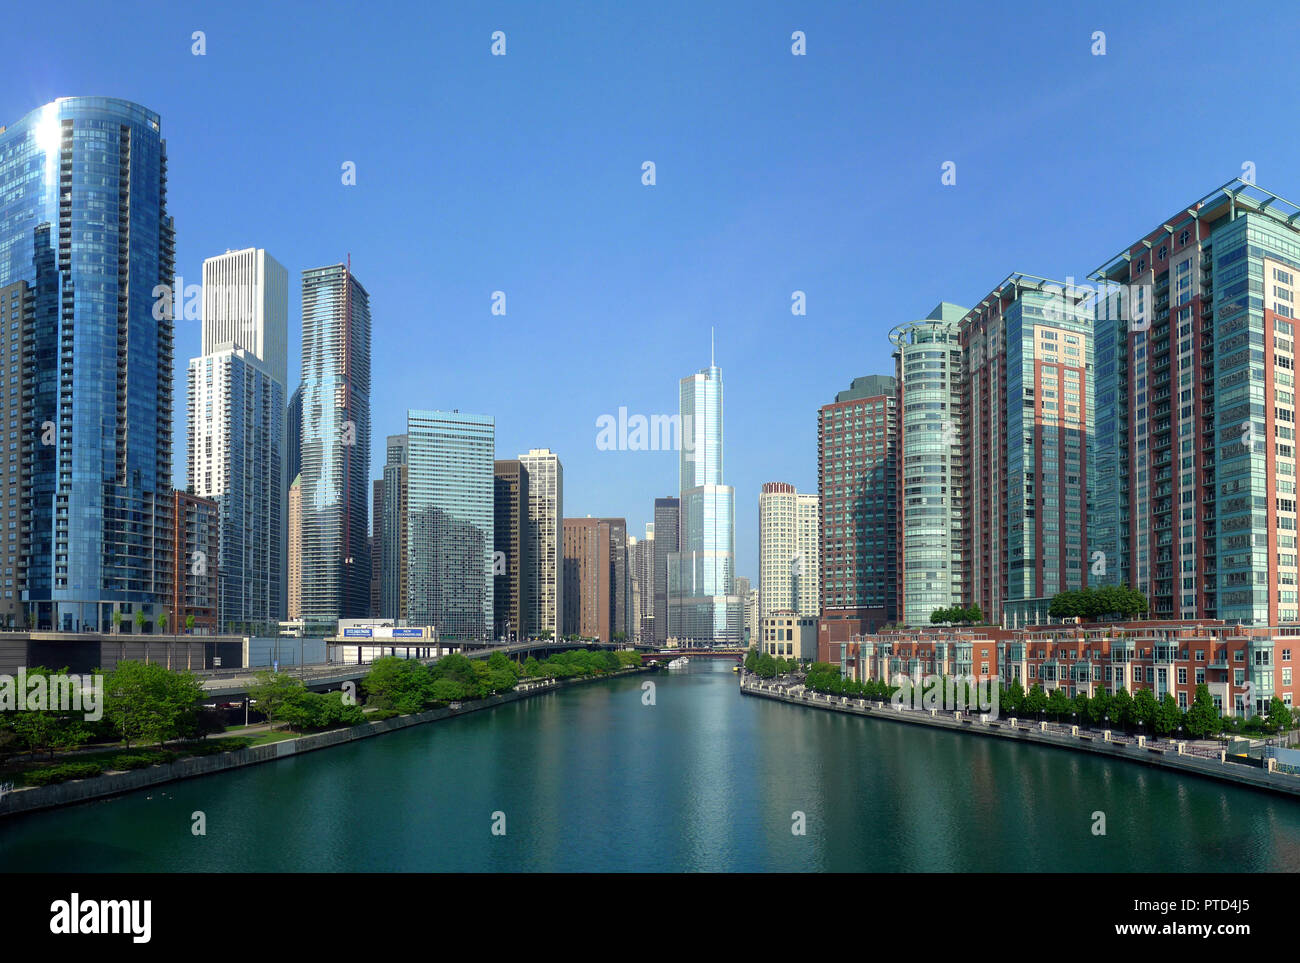 Chicago River Panorama, Illinois, United States of America, Chicago, Middle West, Architecture Capital, Business Center, Skyscrapers, High Rises Stock Photo